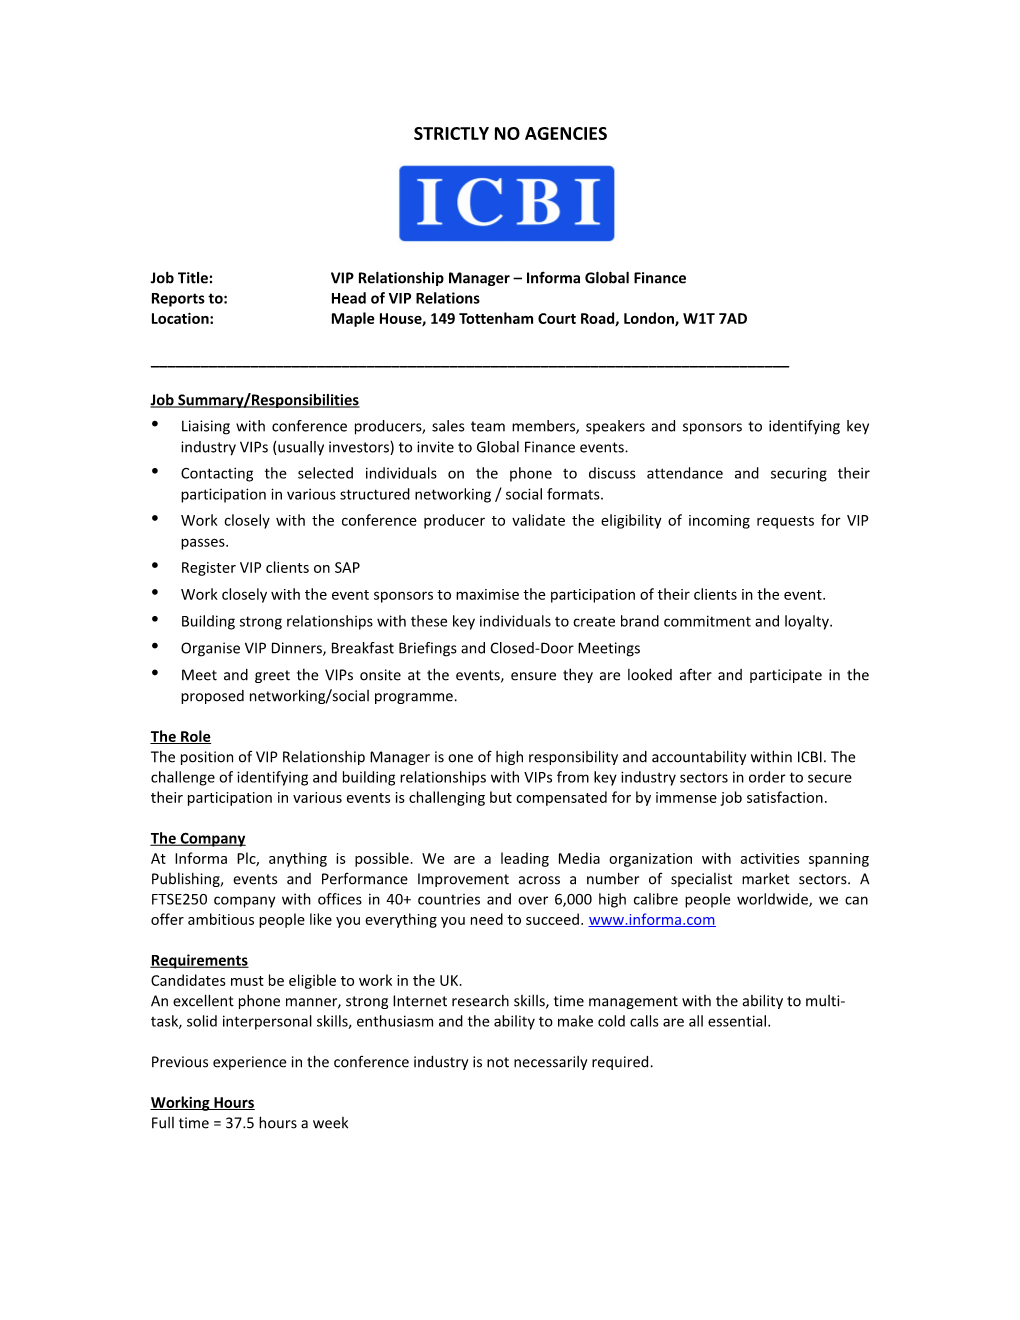 IIR Pharmaceutical Key Account Manager